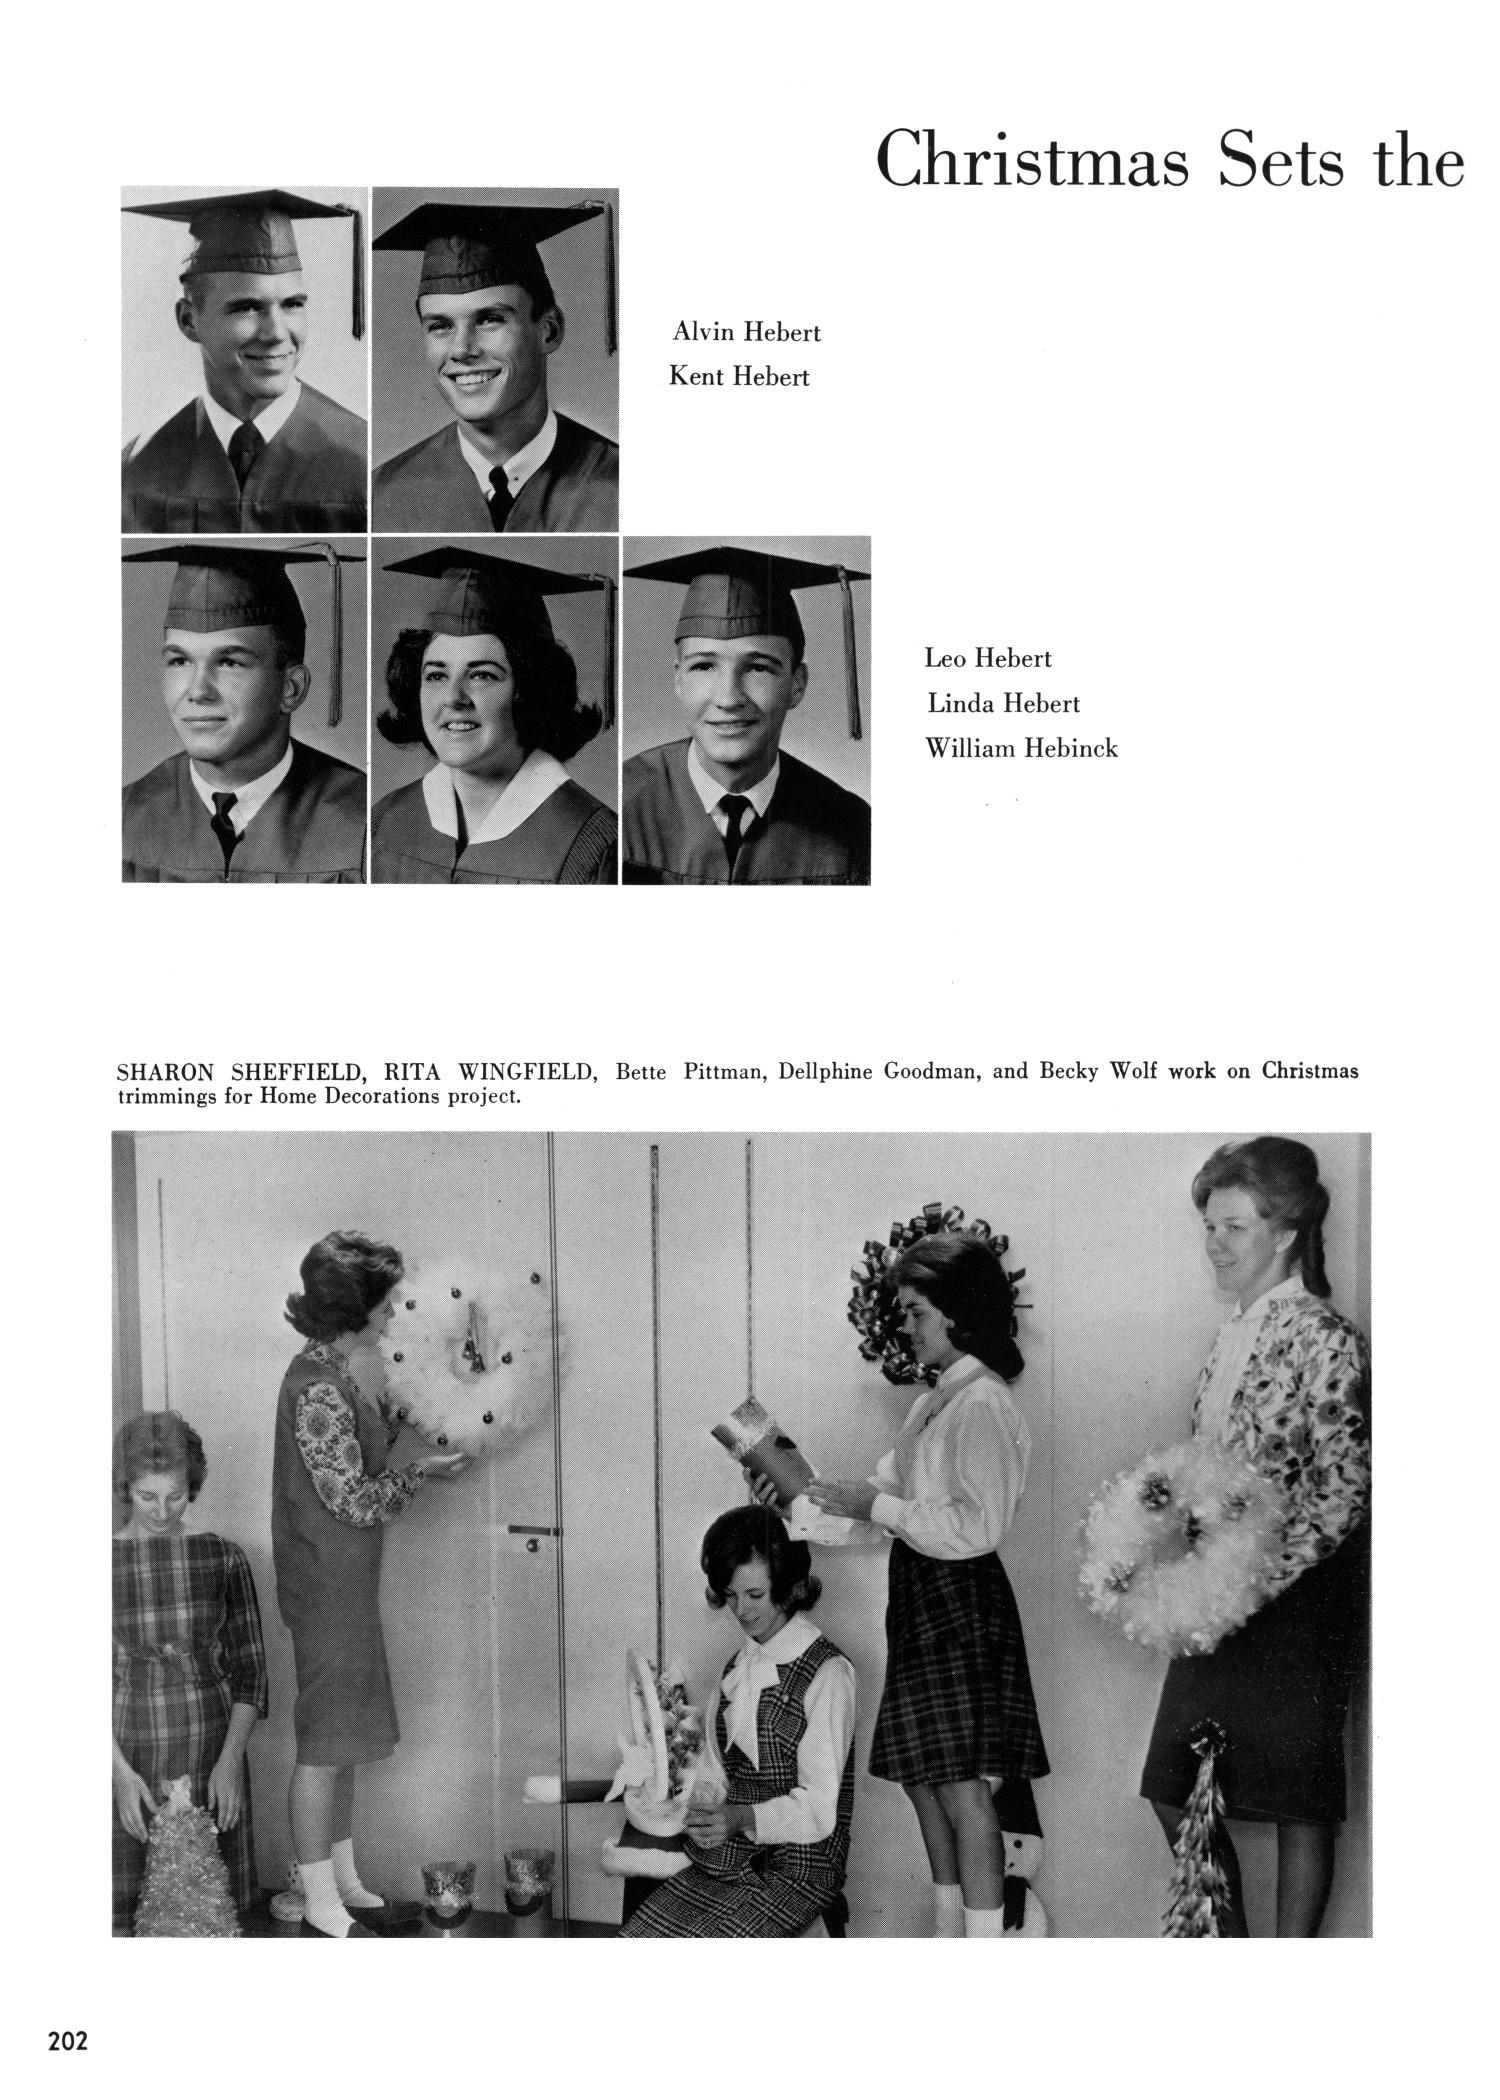 The Yellow Jacket, Yearbook of Thomas Jefferson High School, 1964
                                                
                                                    202
                                                